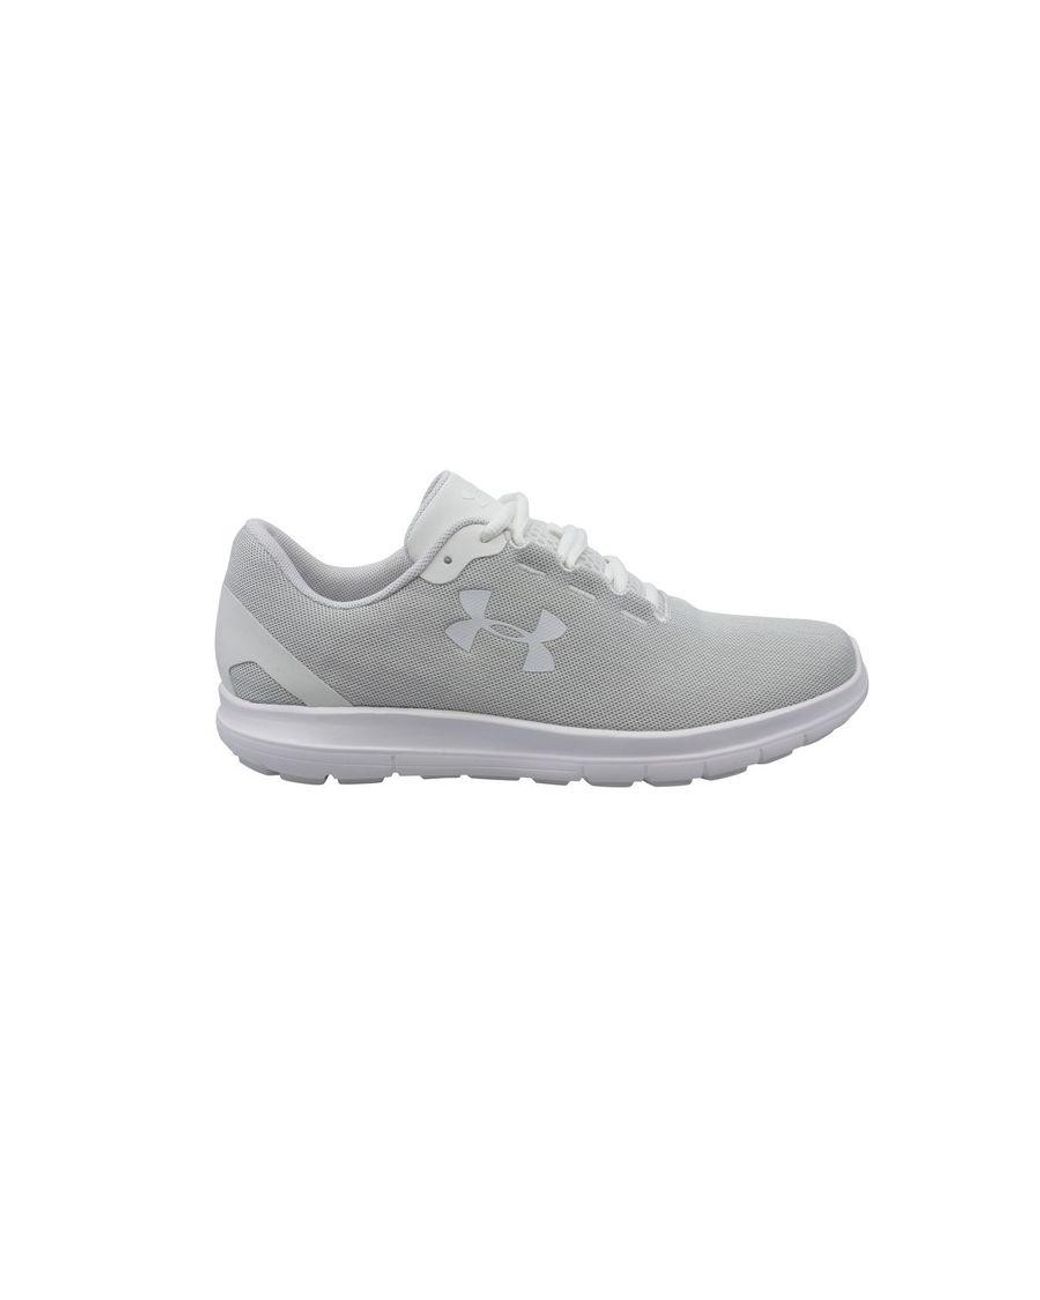 Under Armour Ua Remix Low Trainers - Textile in Grey | Lyst UK